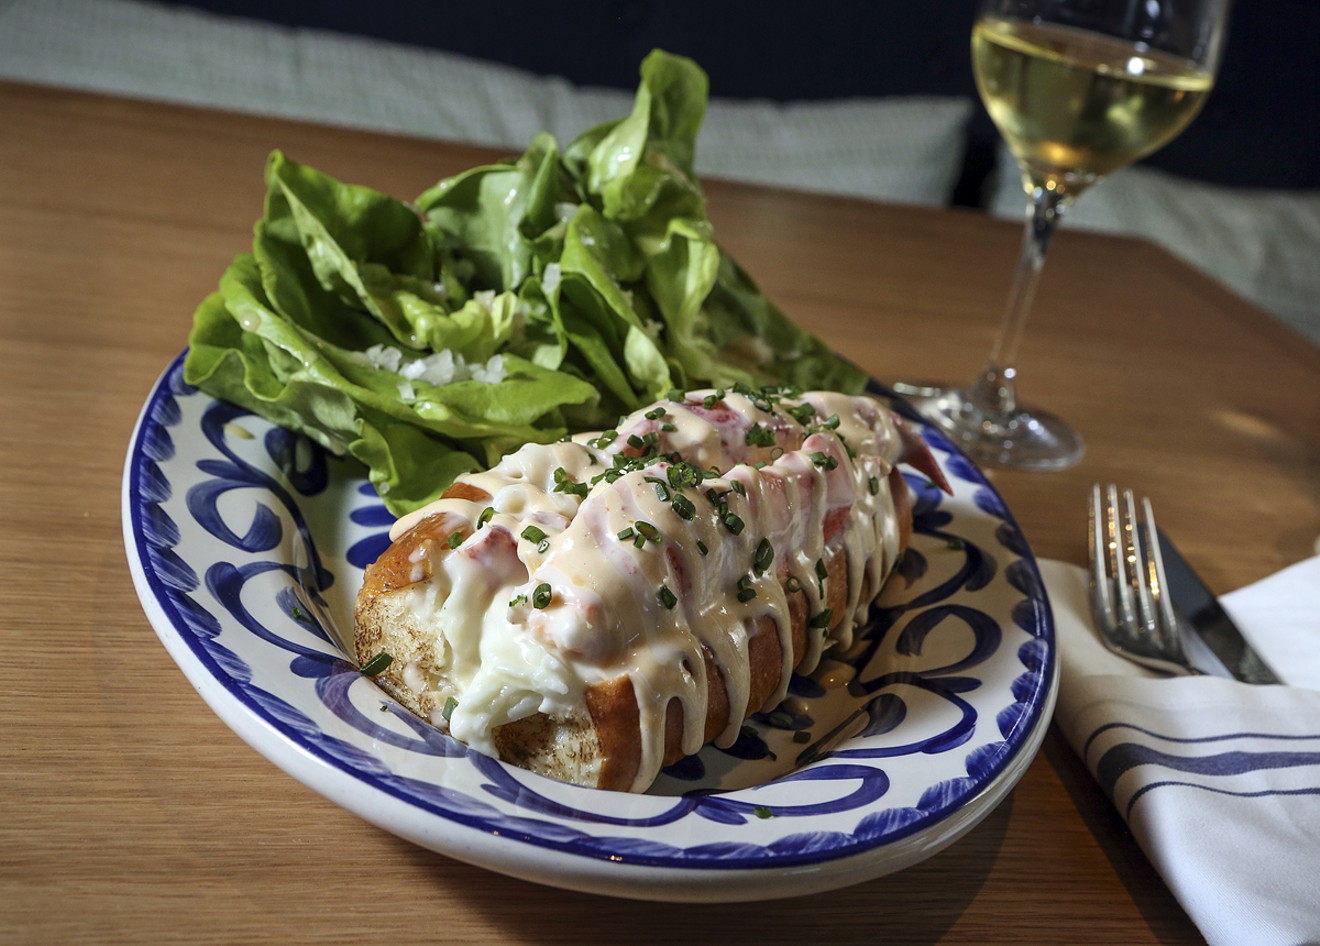 Butter-poached lobster roll. See more photos from Point Royal here.